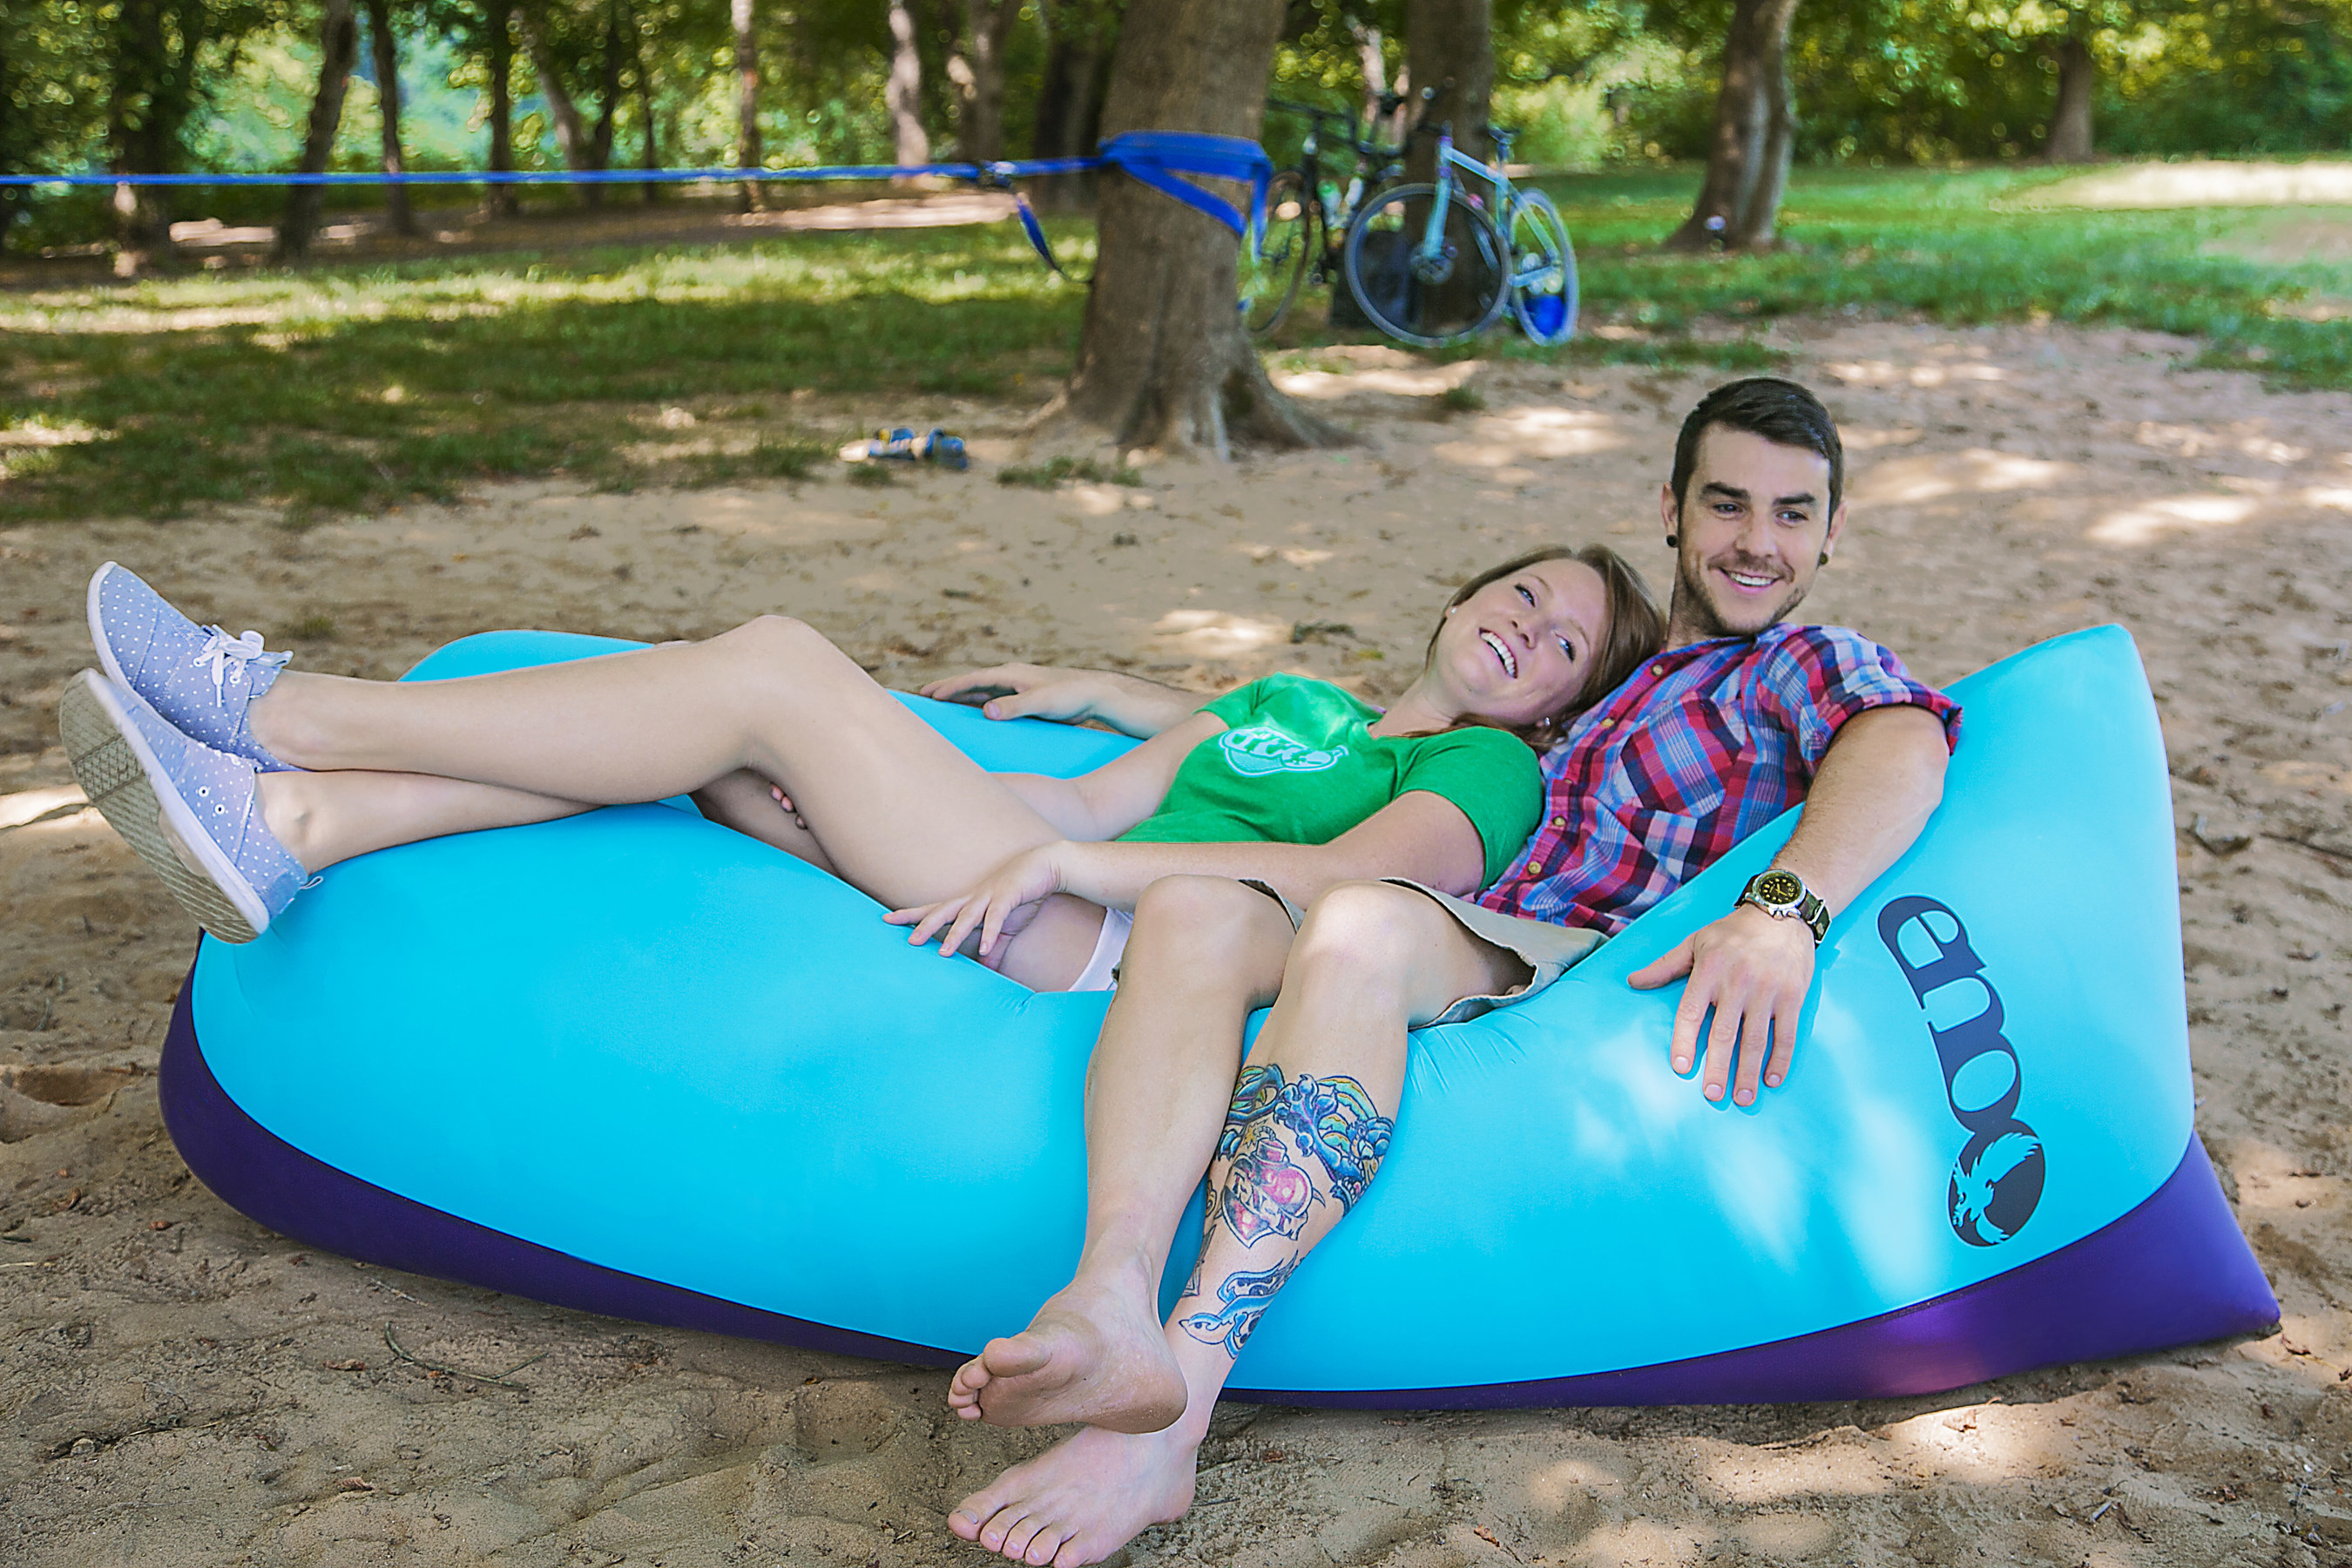 REPREVE and ENO launch inflatable lounger made from 16 recycled plastic bottles- the Billow Air Lounge